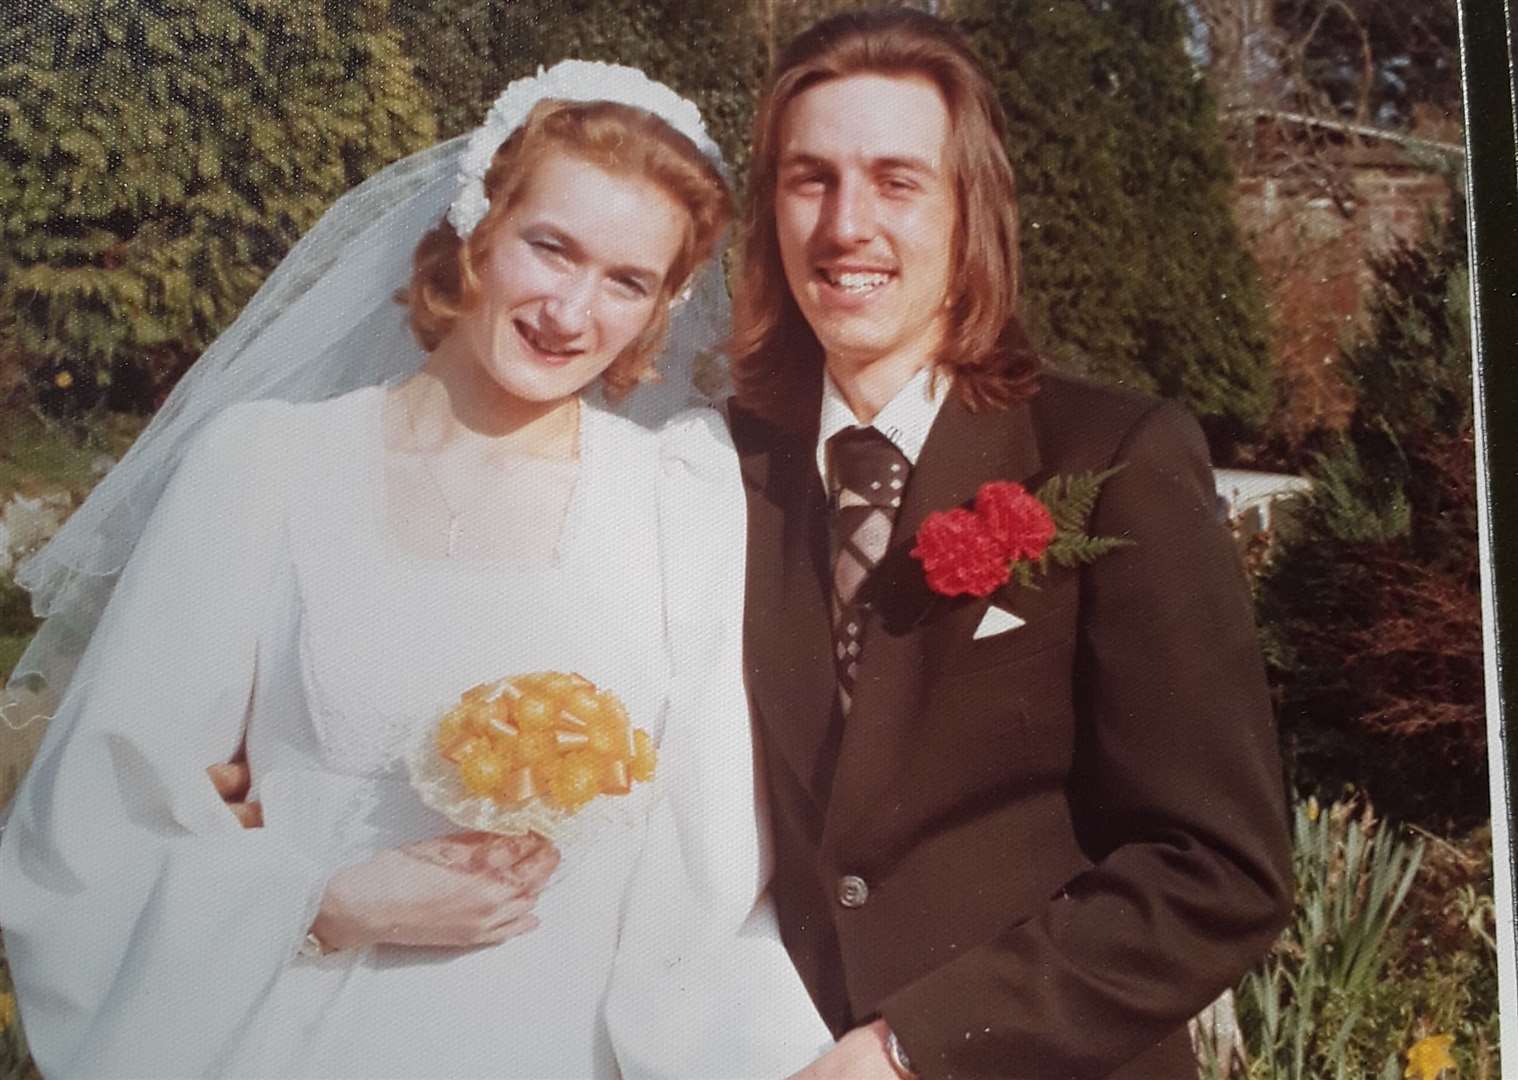 Sue and Clive on their wedding day, 44 years ago